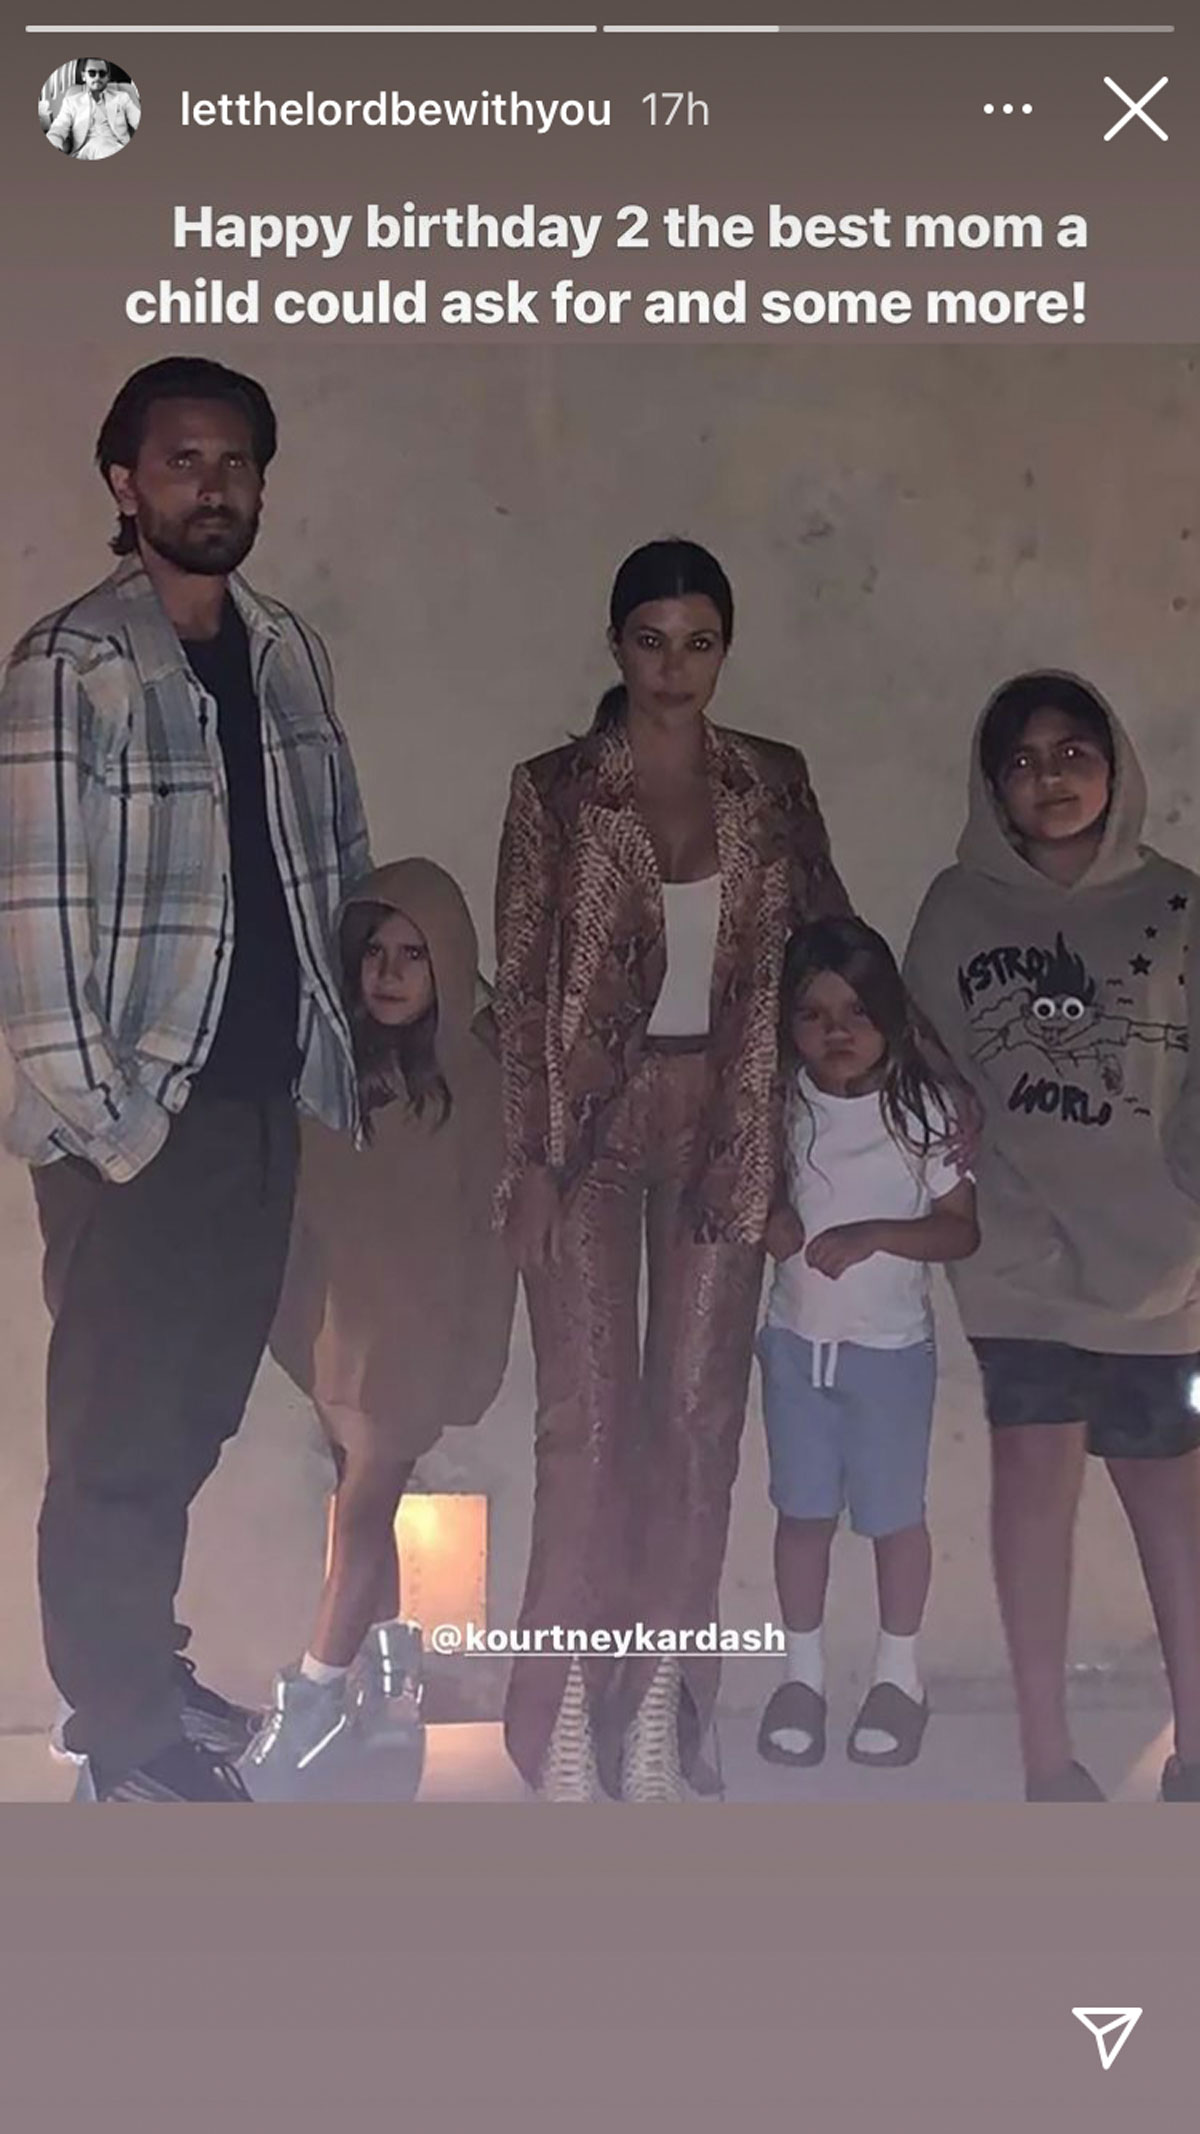 Scott Disick shares his best birthday wishes with 42-year-old baby momma Kourtney Kardashian after BF Travis Barker's mushy IG Post!